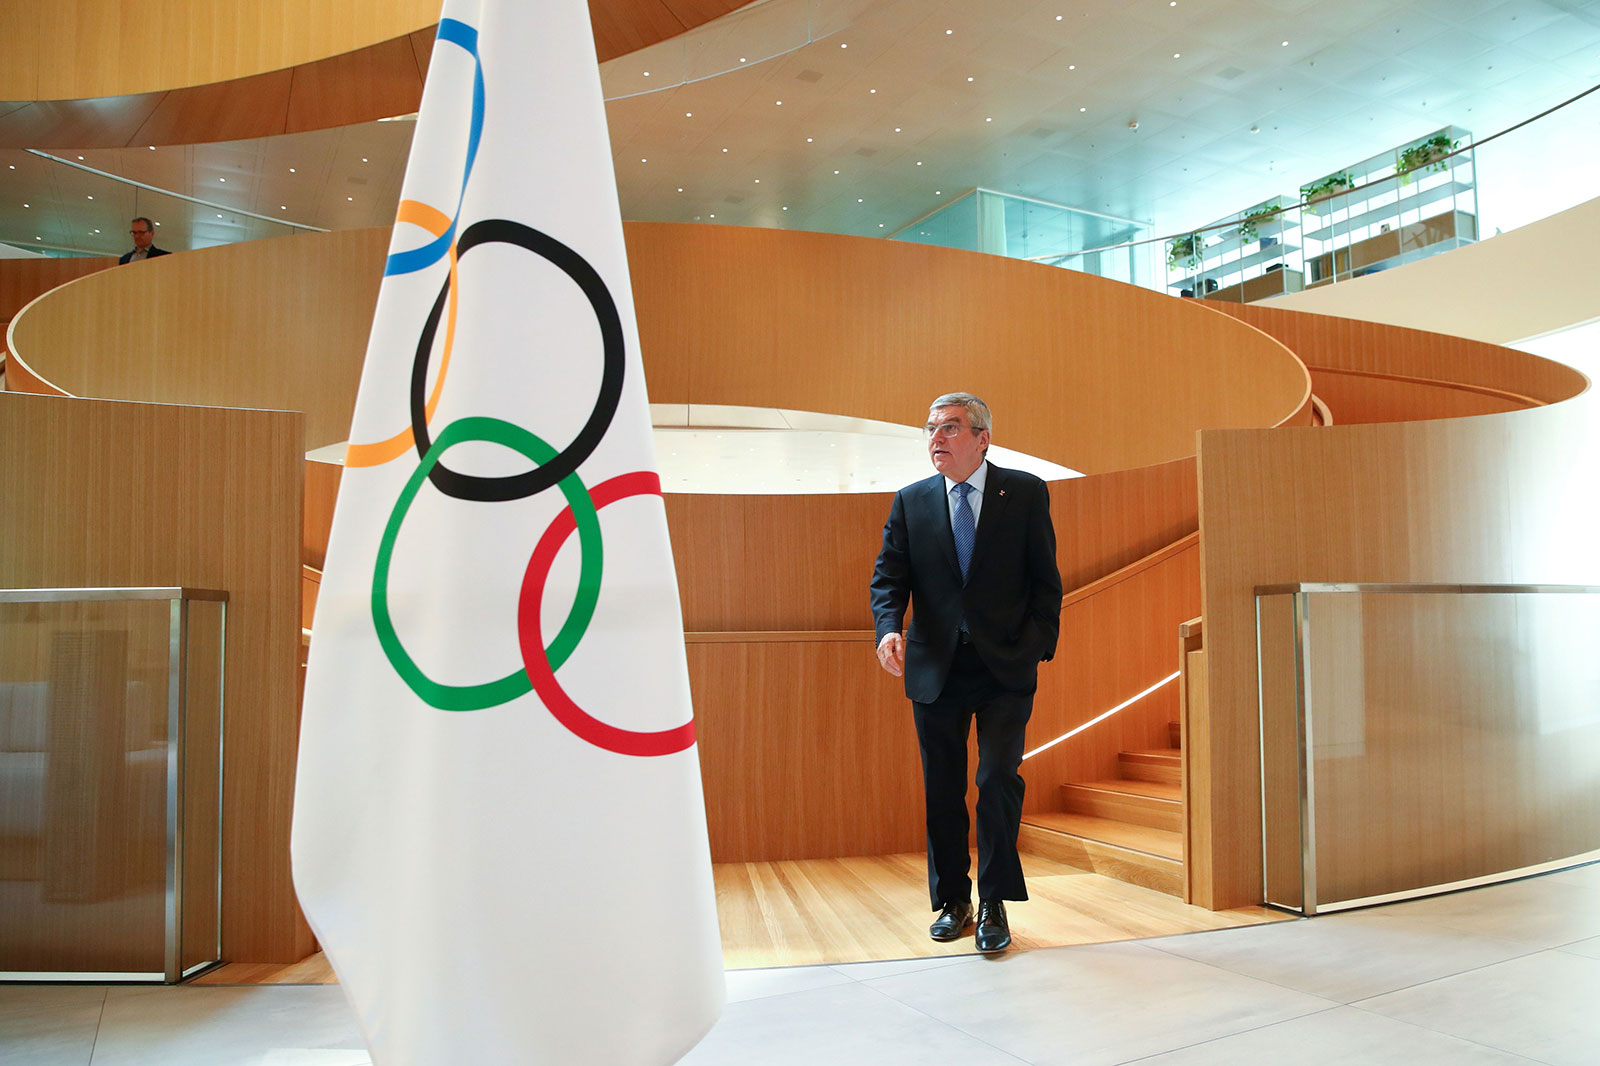 In this March 25 photo, IOC President Thomas Bach arrives for an interview after the historic decision to postpone the 2020 Tokyo Olympic Games due to the coronavirus pandemic, in Lausanne, Switzerland.